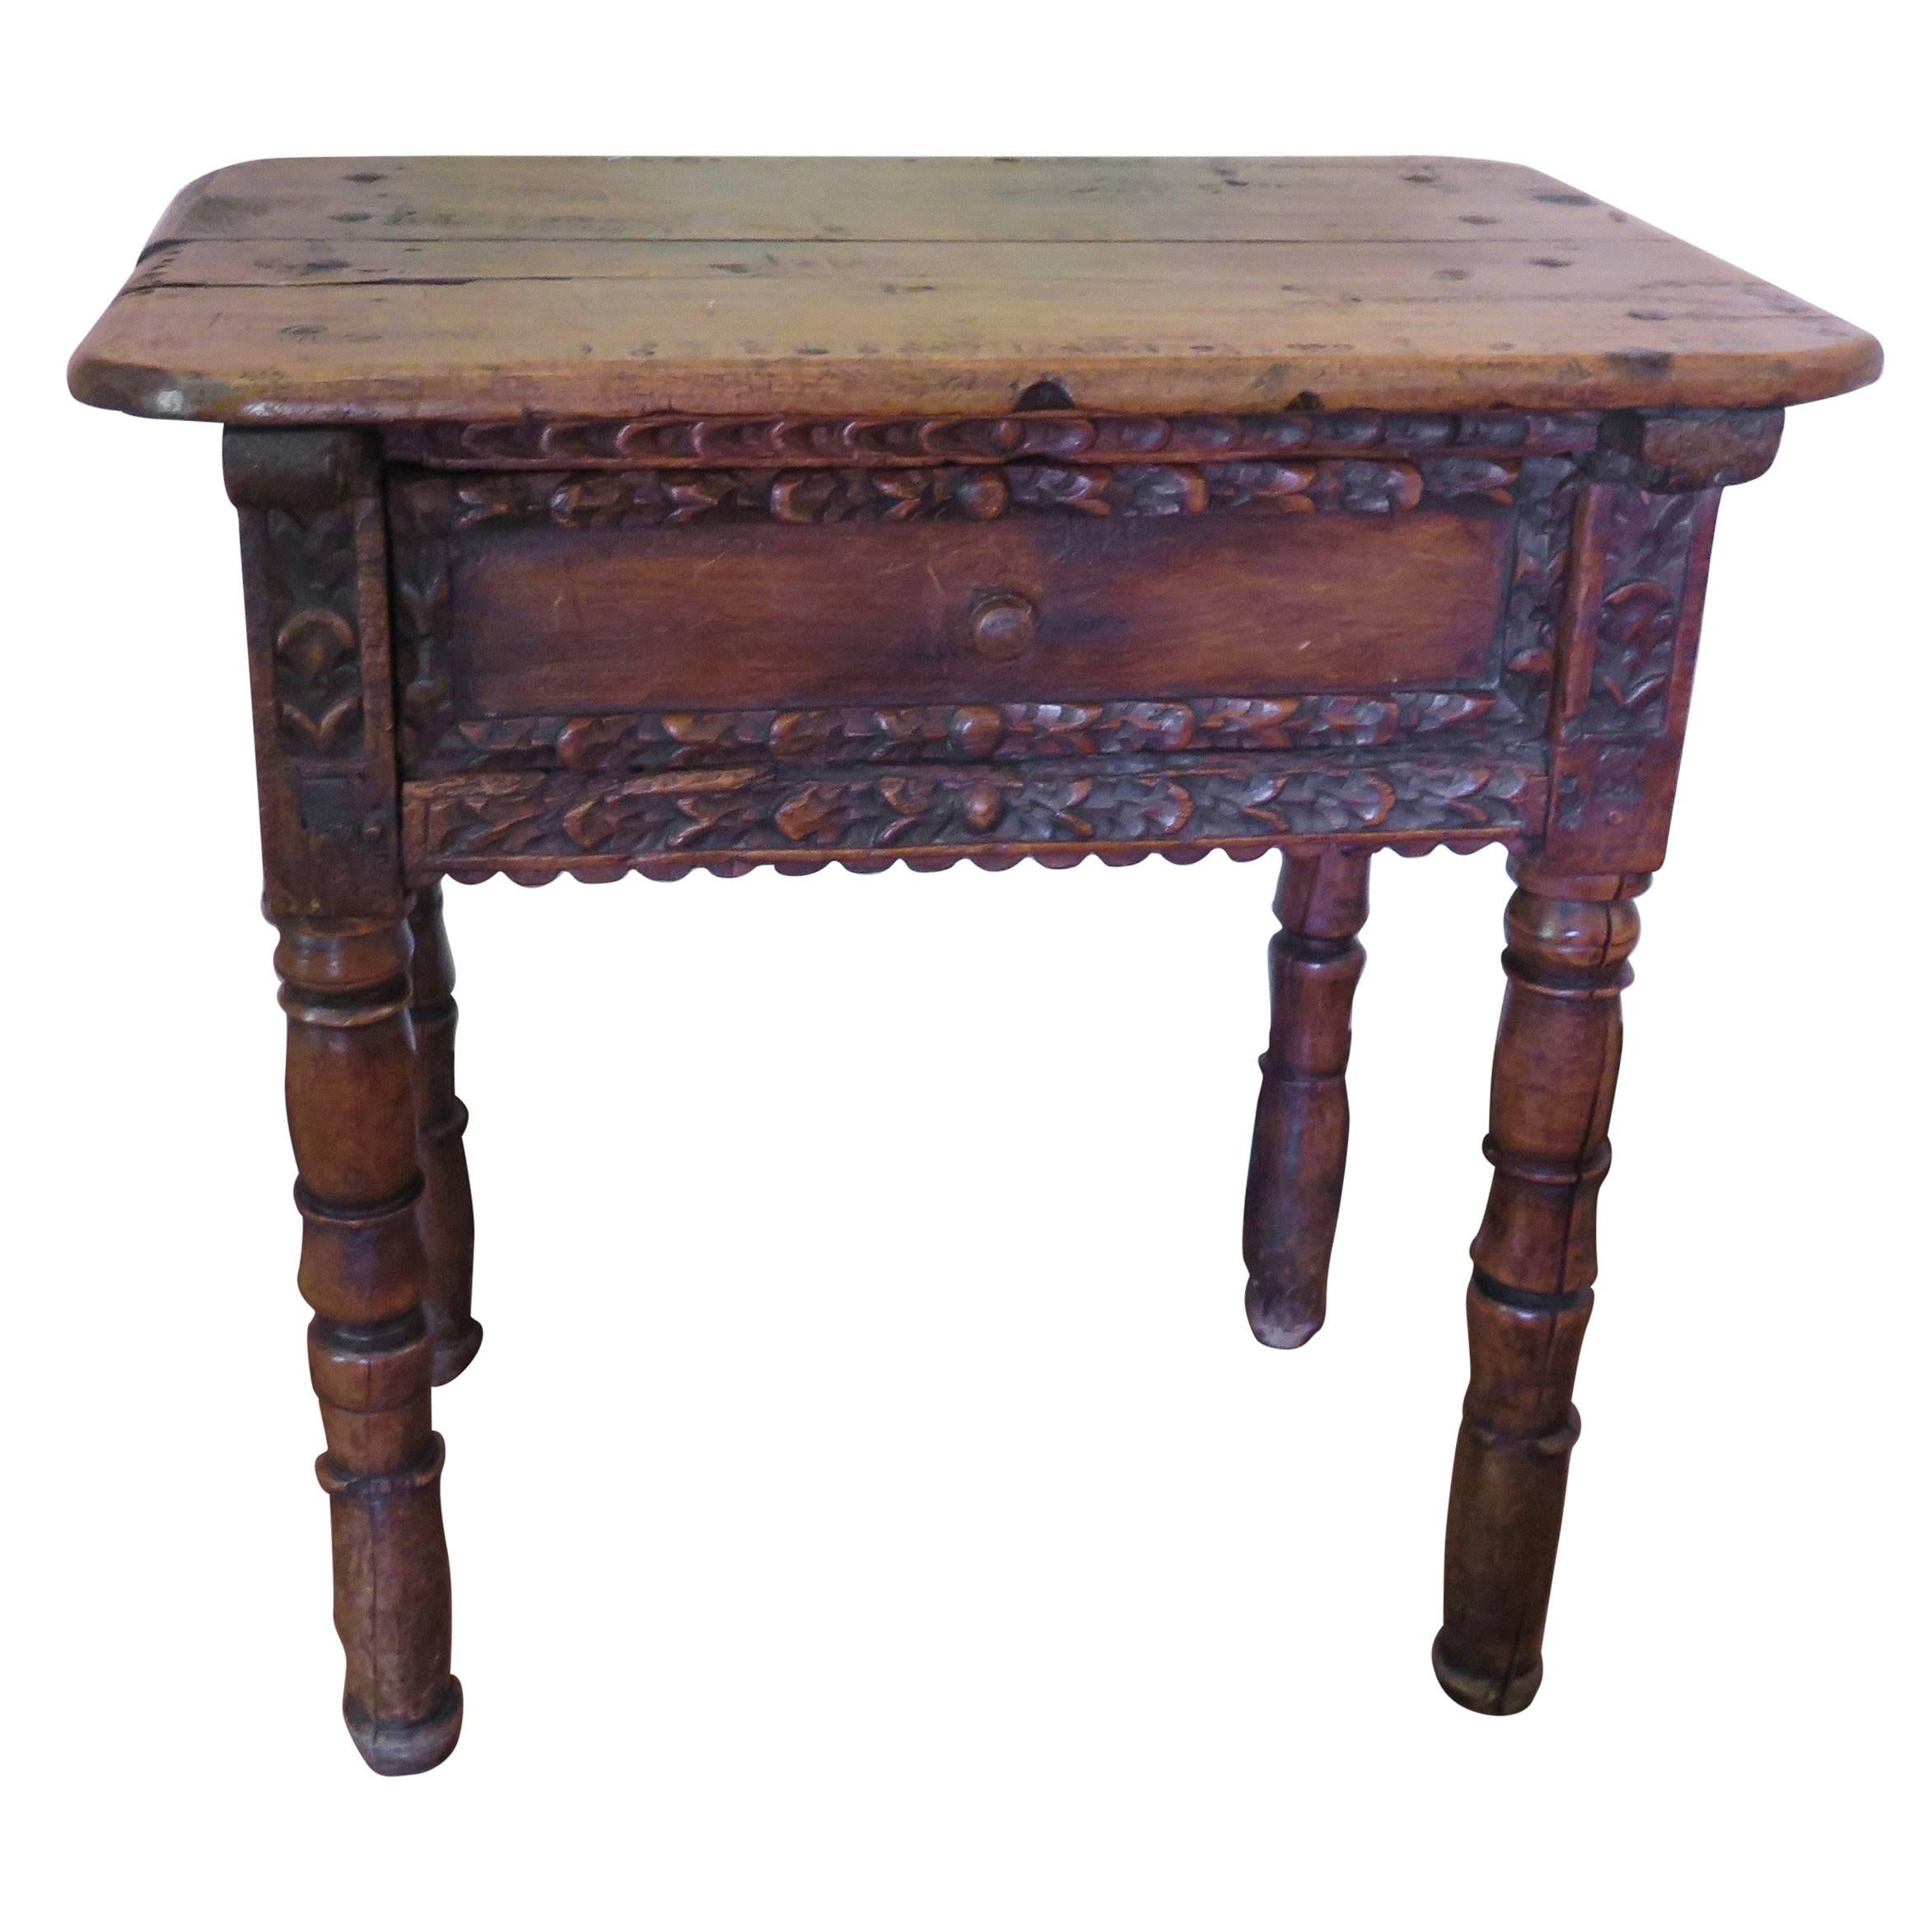 18th Century Spanish Colonial Side Table Michael Haskell